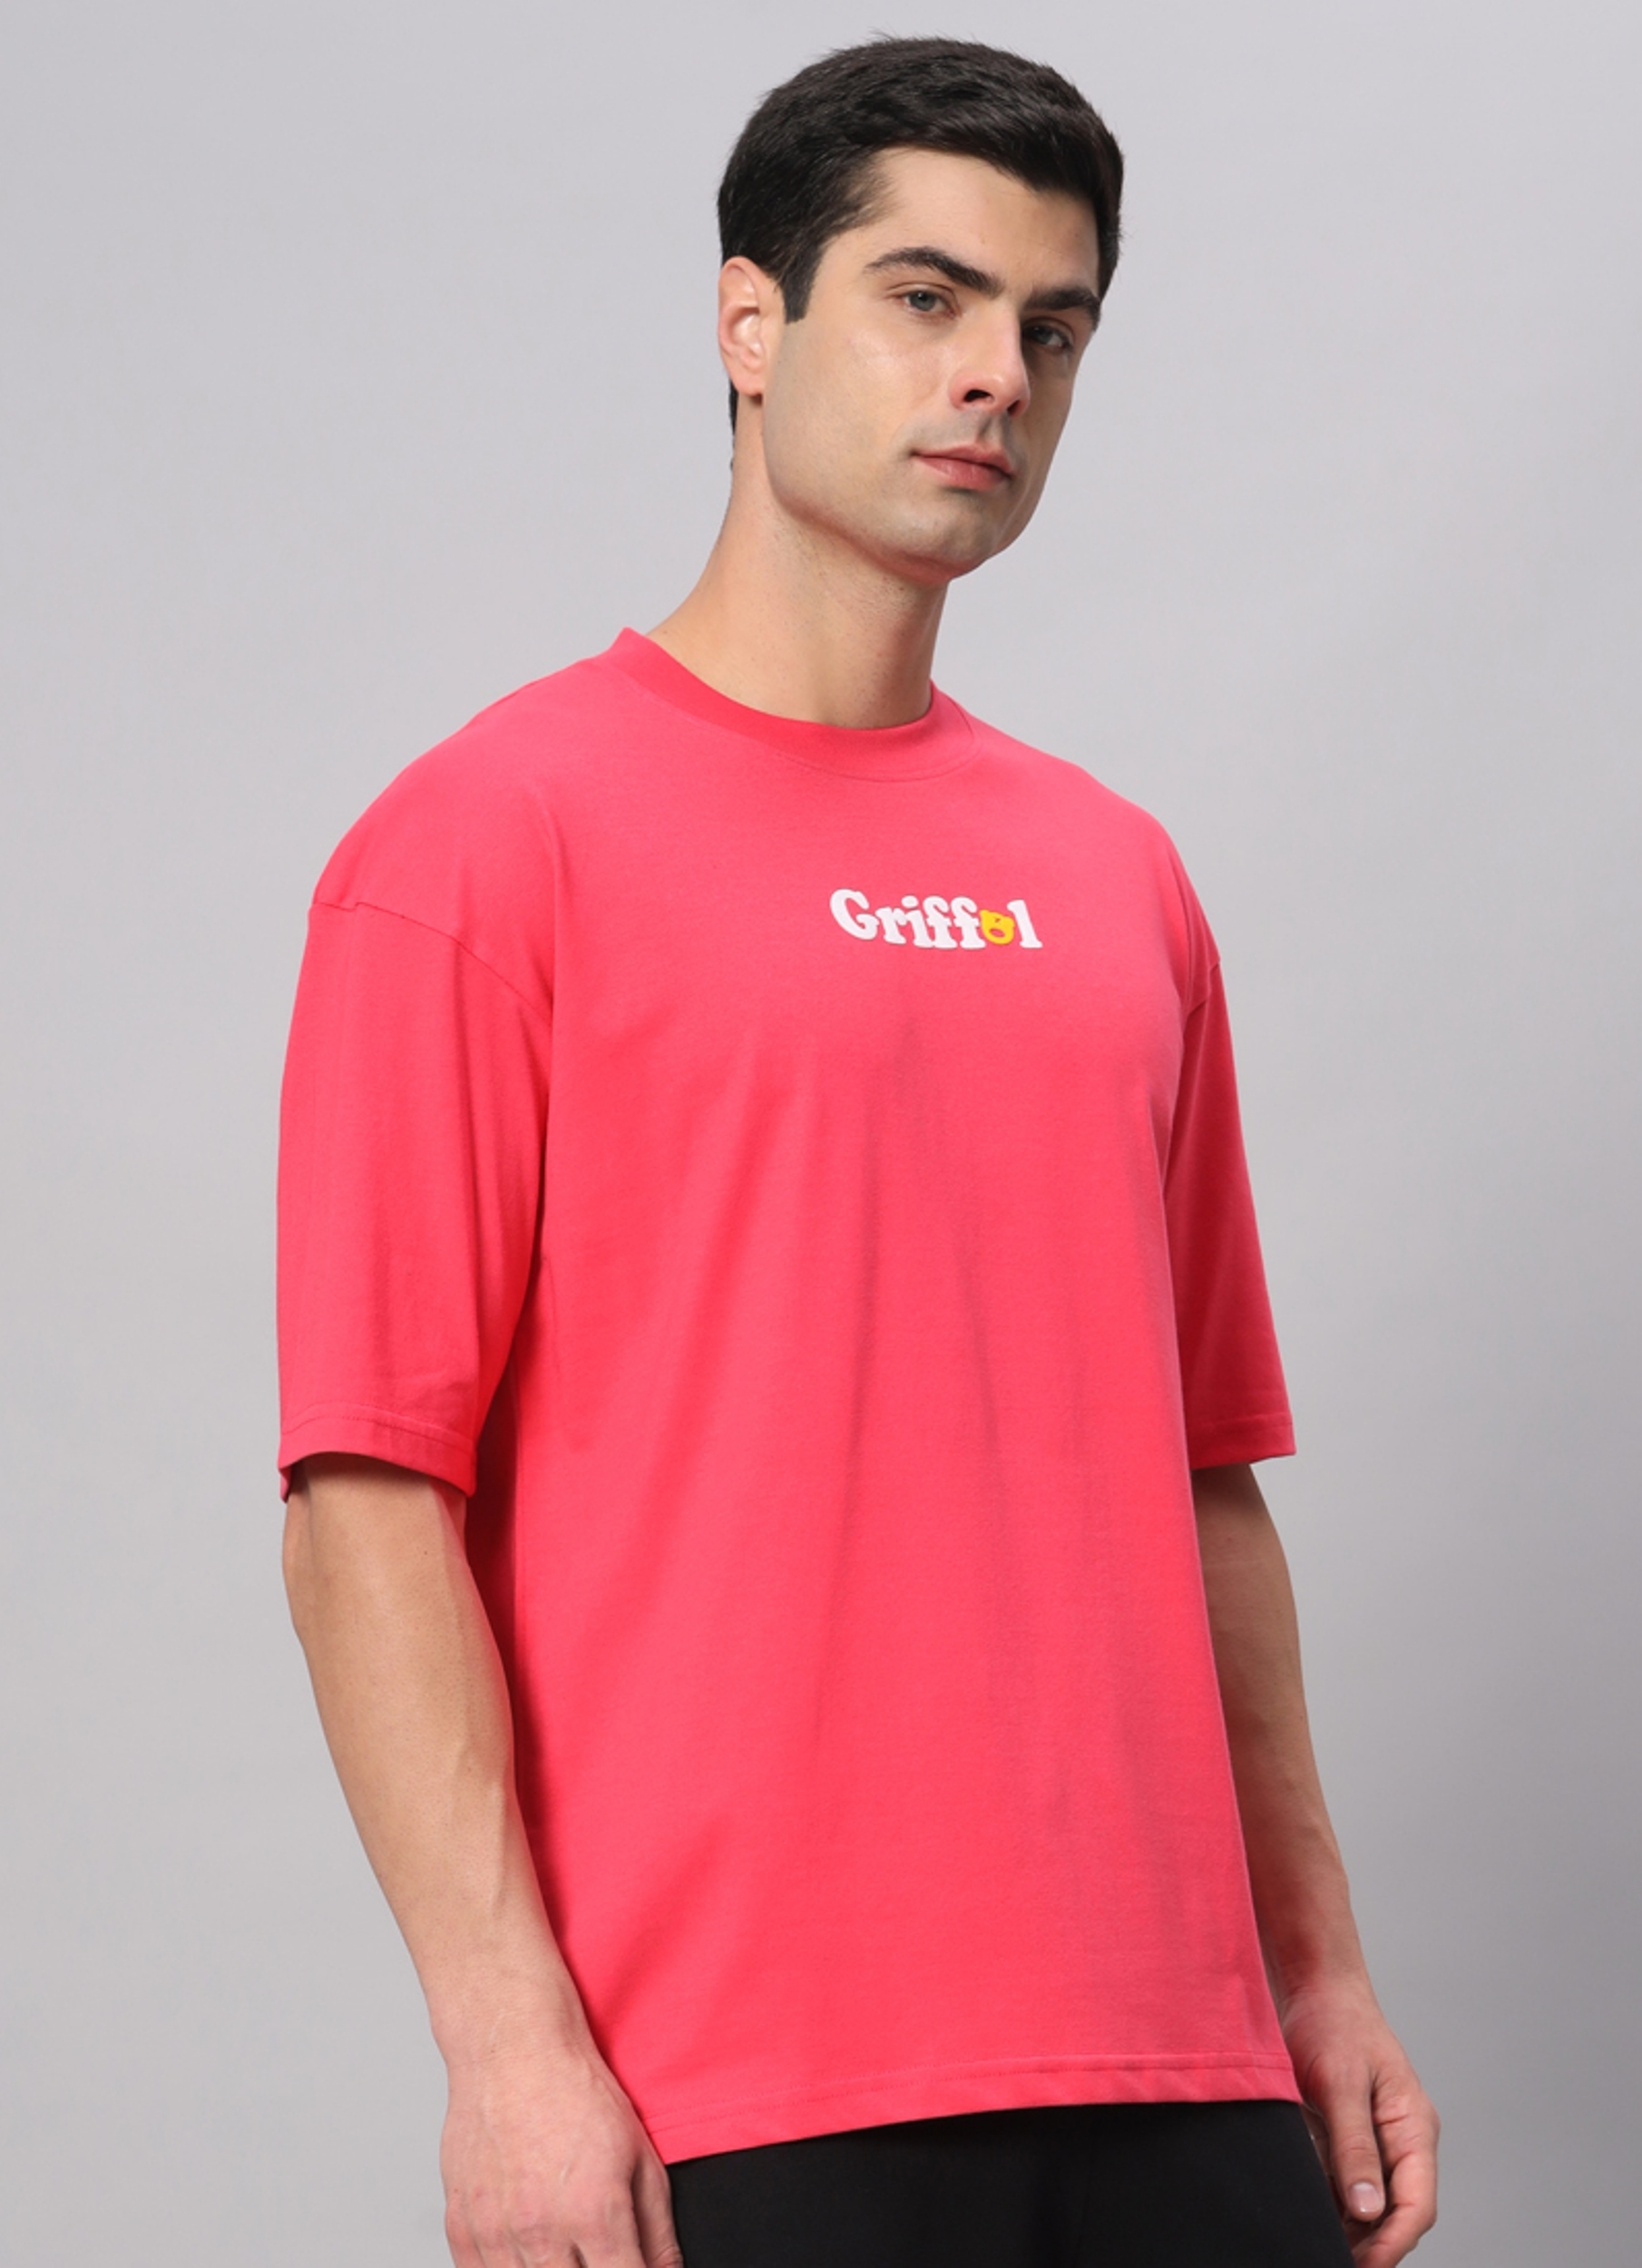 GRIFFEL | Men's Pink Cotton Loose Printed   Boxy T-Shirt s